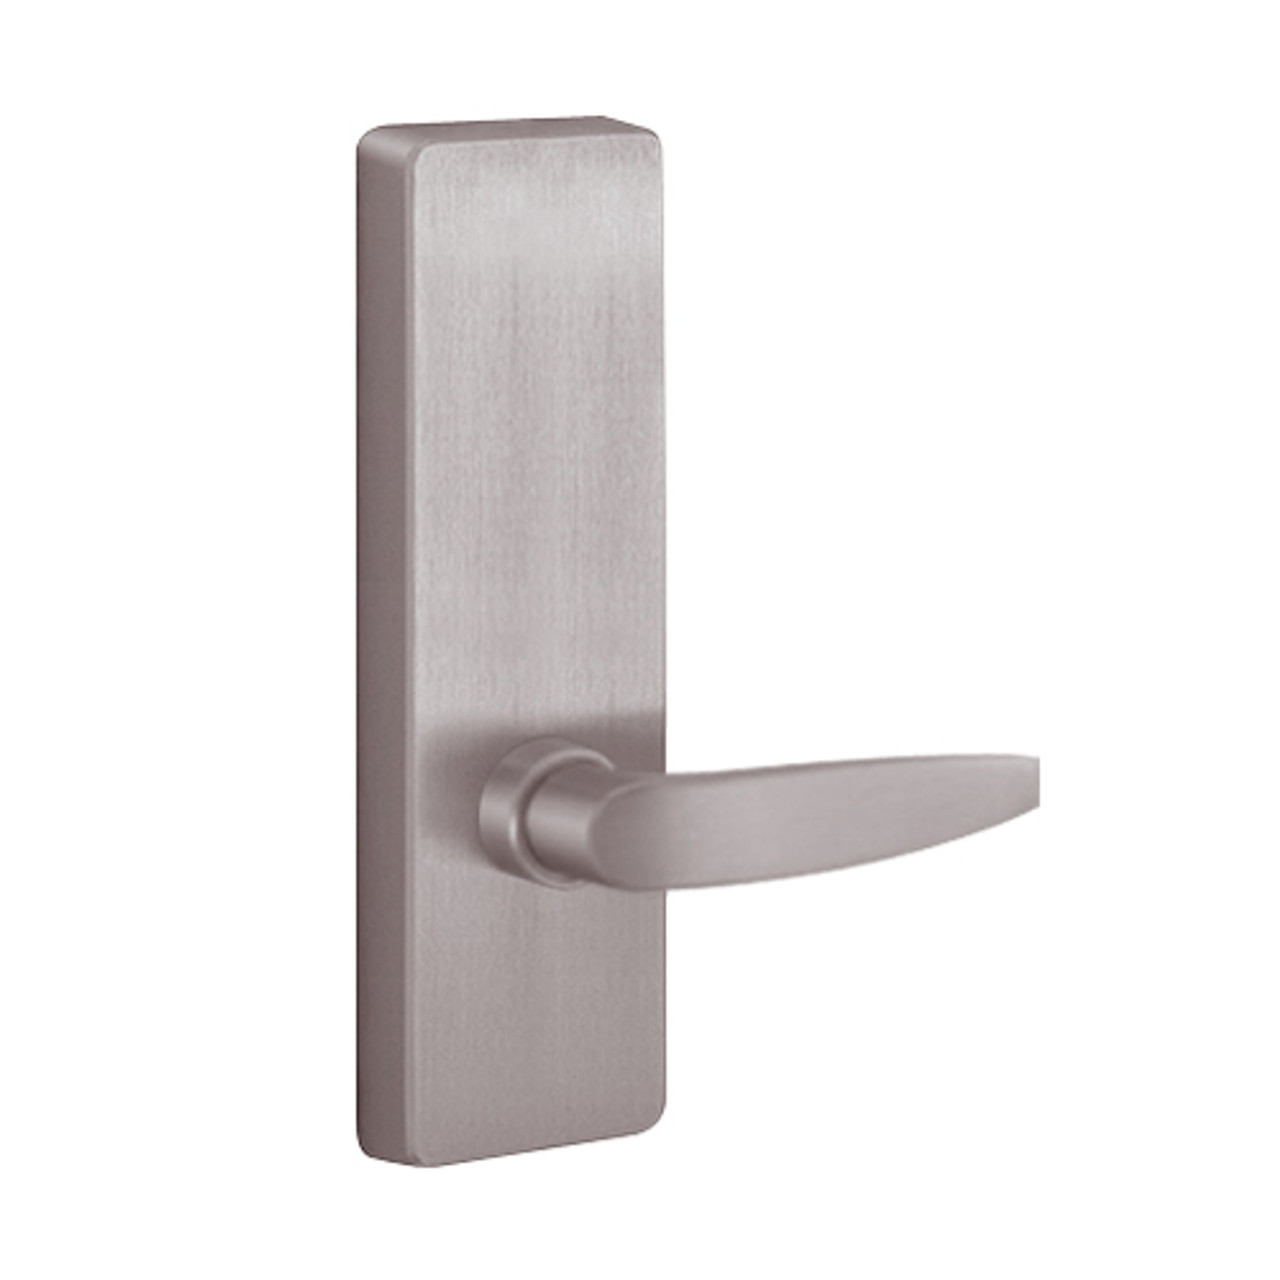 R4902B-630-LHR PHI Dummy Trim with B Lever Design for Apex and Olympian Series Exit Device in Satin Stainless Steel Finish